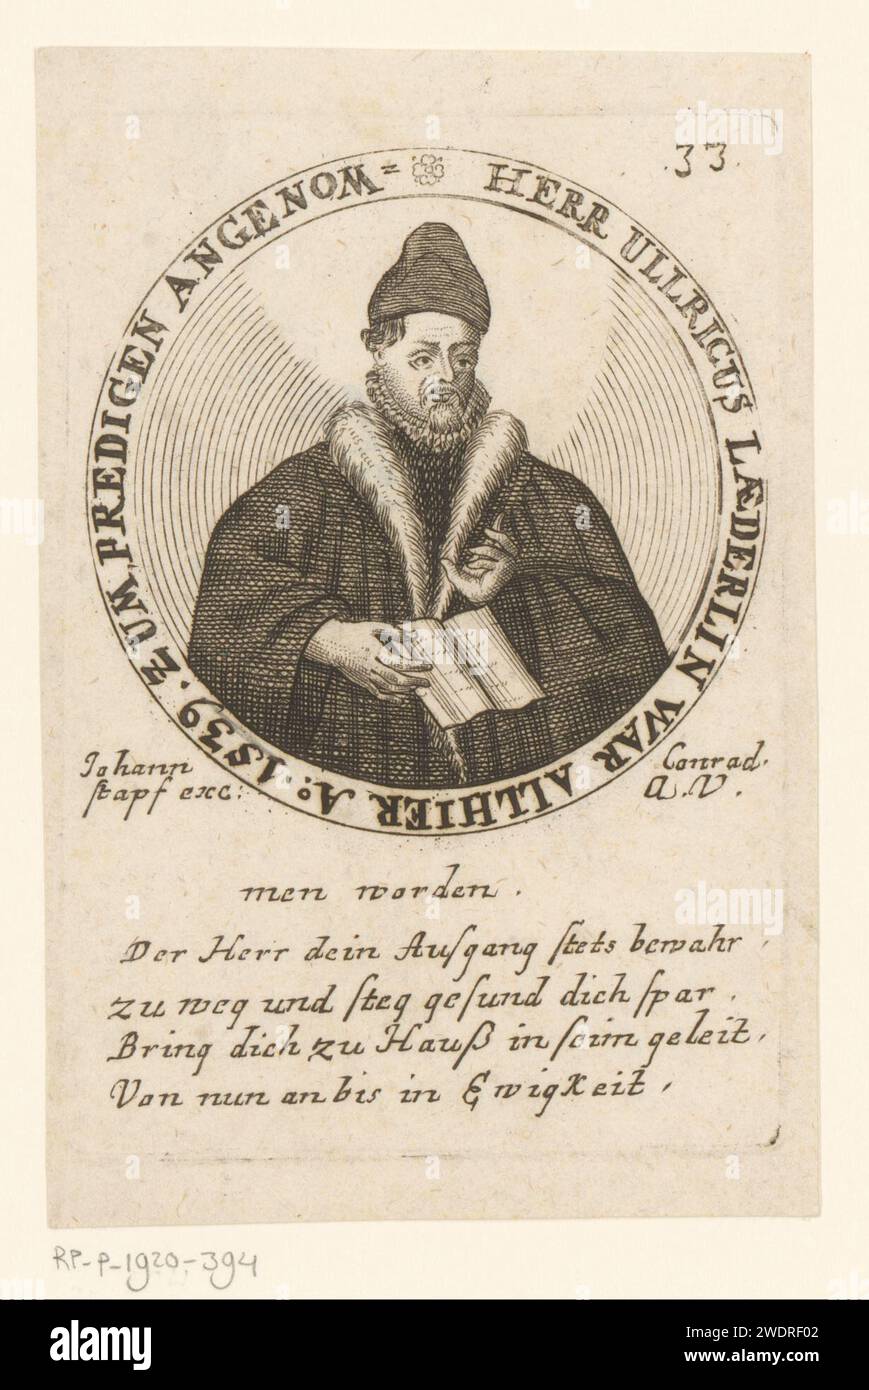 Portrait of Ulrich Läderlin, Anonymous, Johann Conrad Stapf (16th century), 1539 - c. 1600 print Numbered at the top right: 33. Augsburg paper engraving / etching historical persons Stock Photo